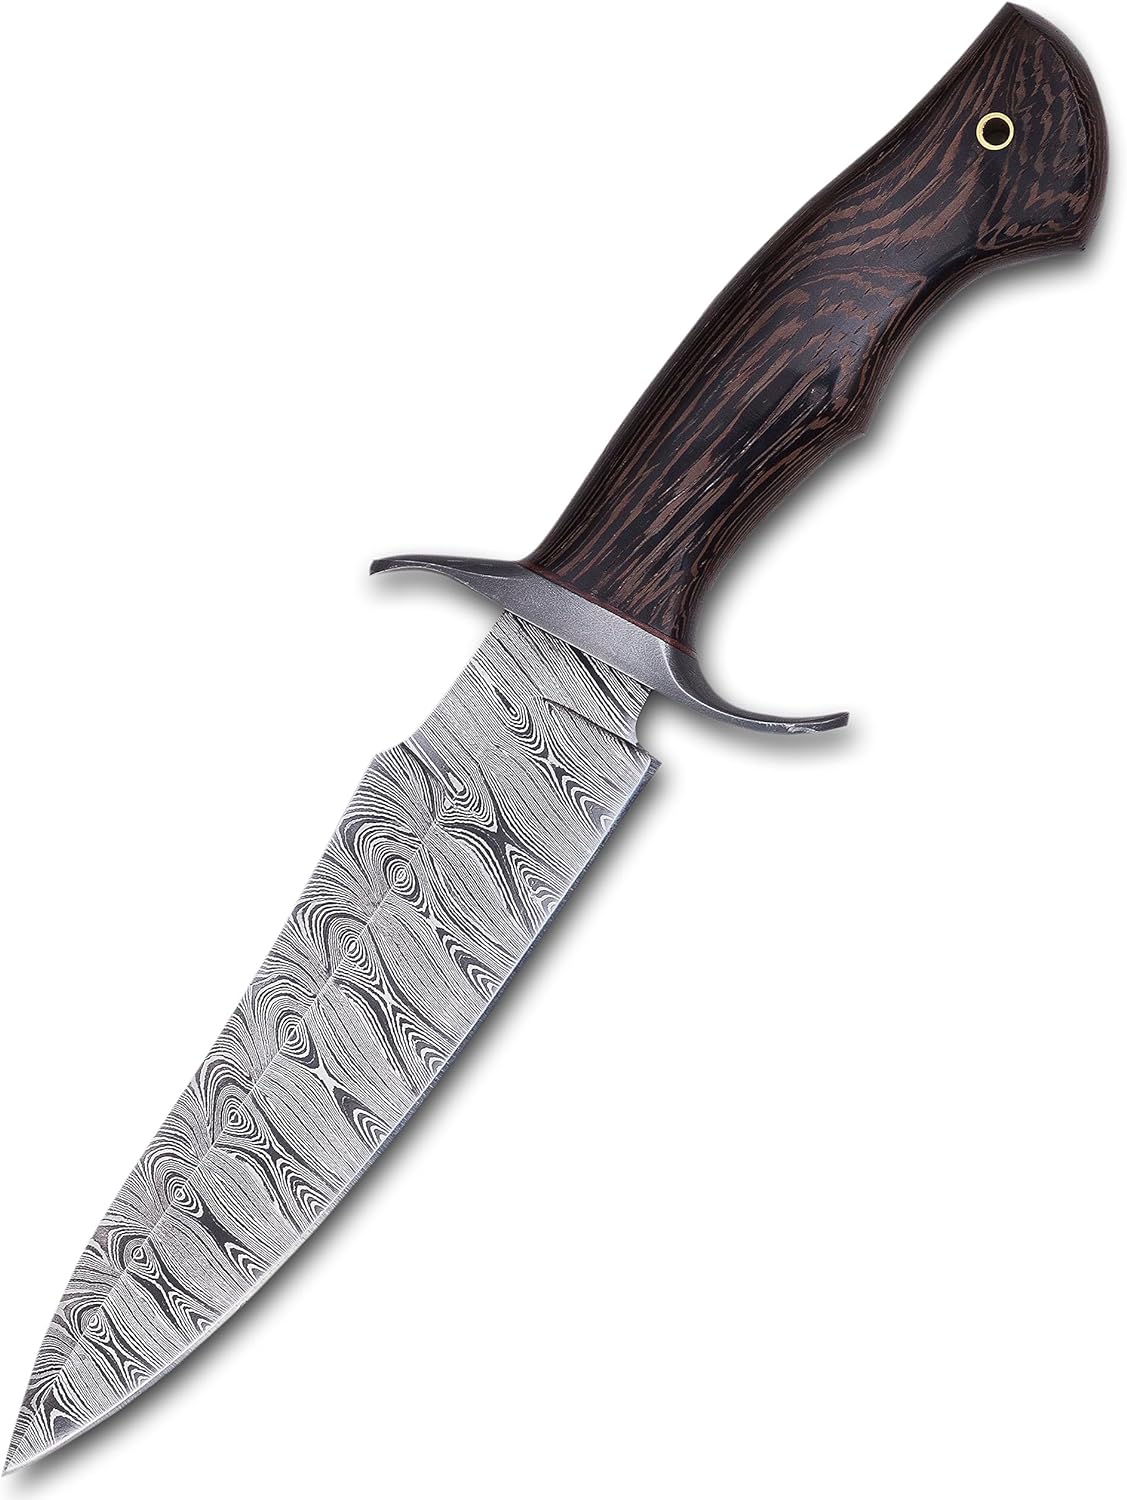 KD Hunting Knife Damascus Steel Survival Knife with Leather Sheath